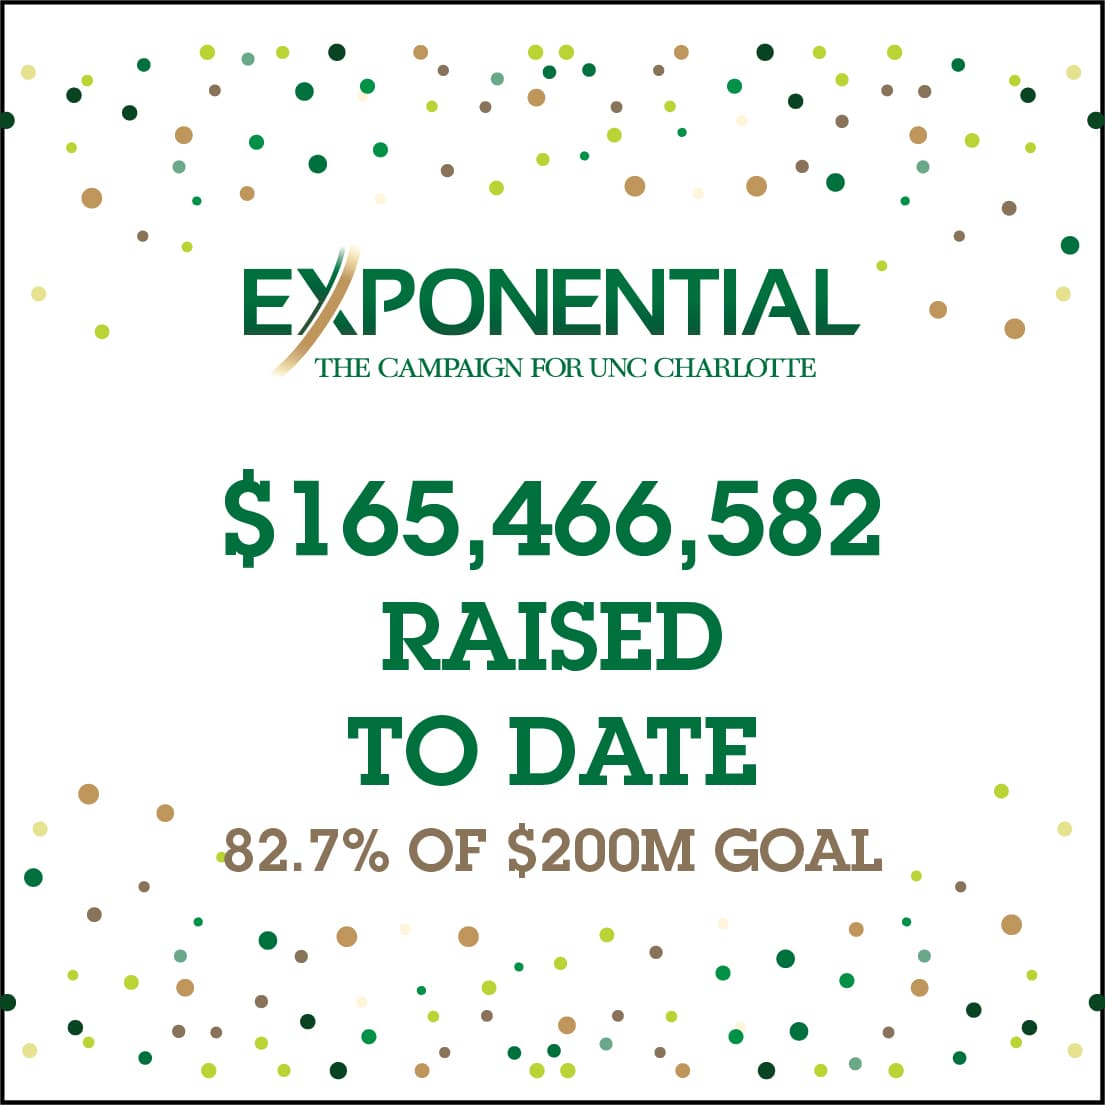 EXPONENTIAL: The Campaign for UNC Charlotte $165,466,582 raised to date; 82.7% of $200M goal